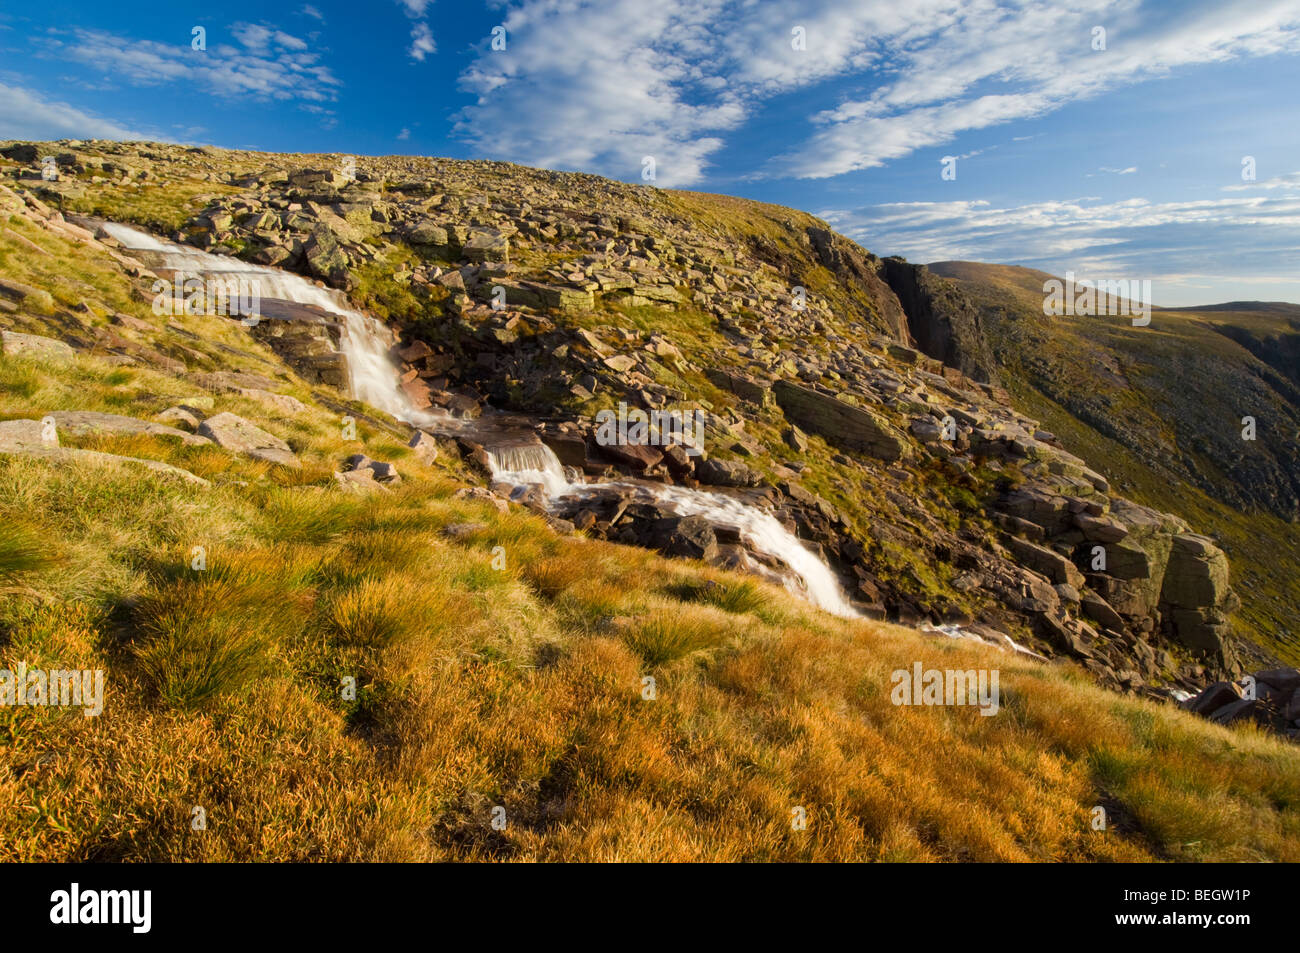 Waterfalls on the Allt Feithe Buidhe stream, Cairngorm plateau. The russet-coloured tussocks in the foreground are Deer Grass Stock Photo